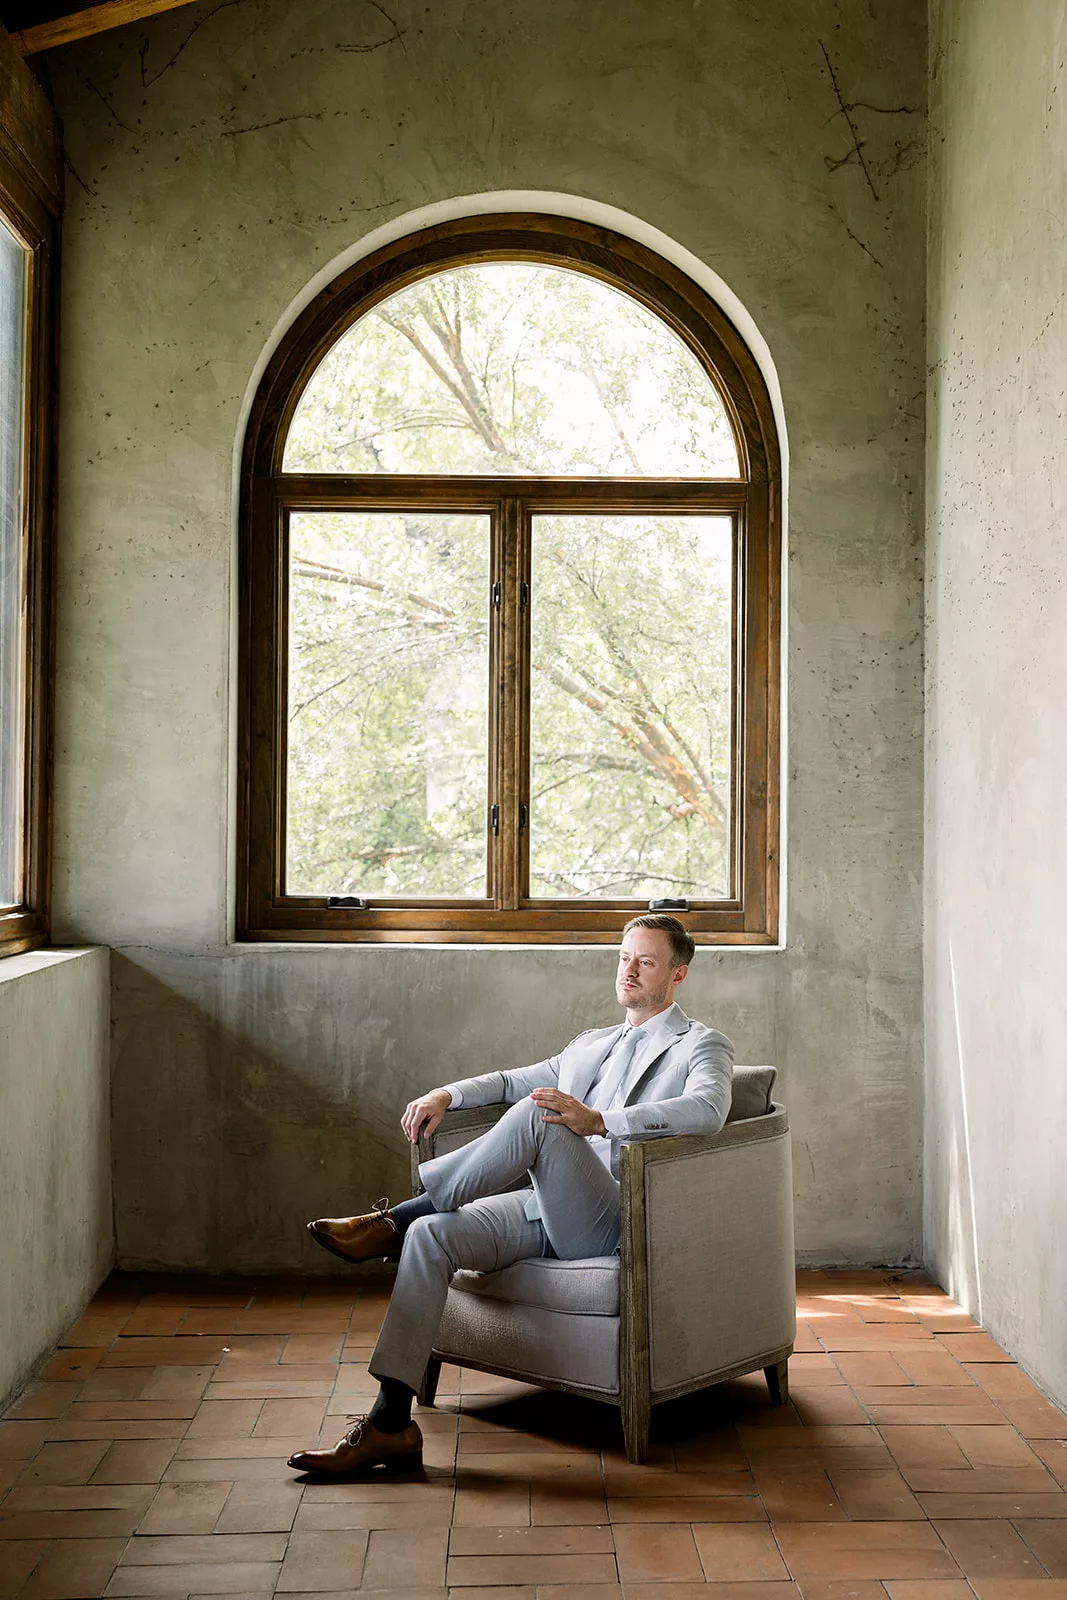 A groom sits in an antique chair in a room with tall round windows